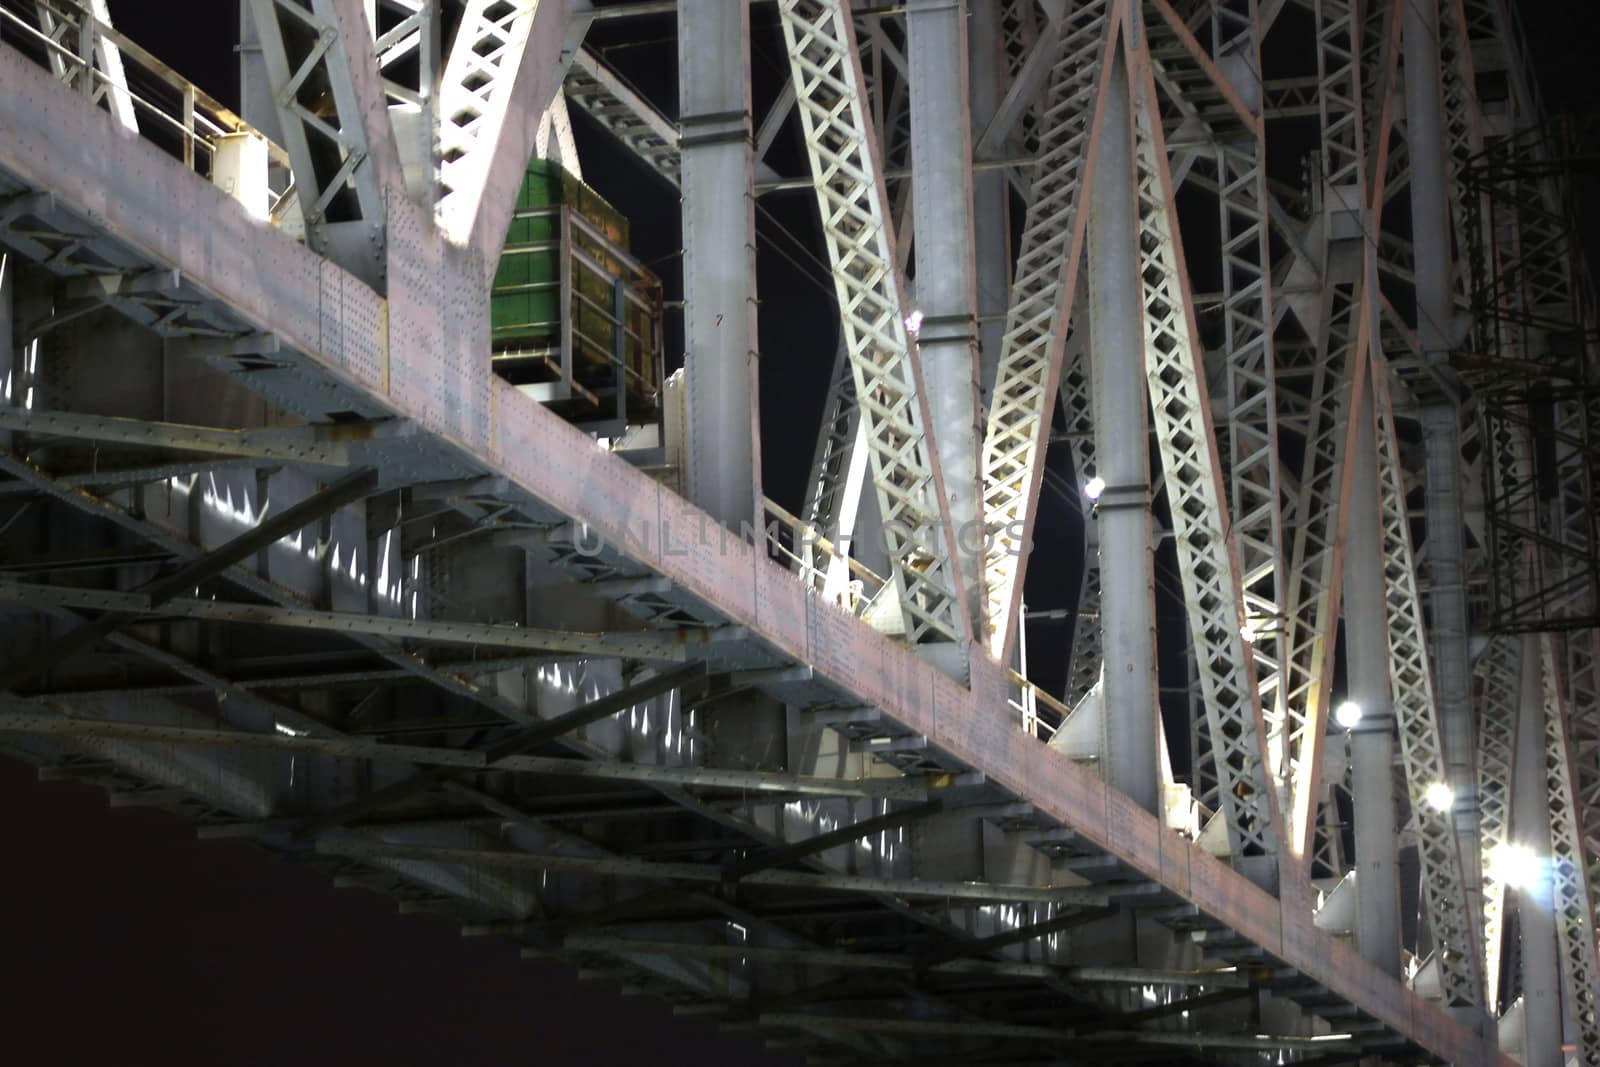 Supports of railway bridge, view from below, at night